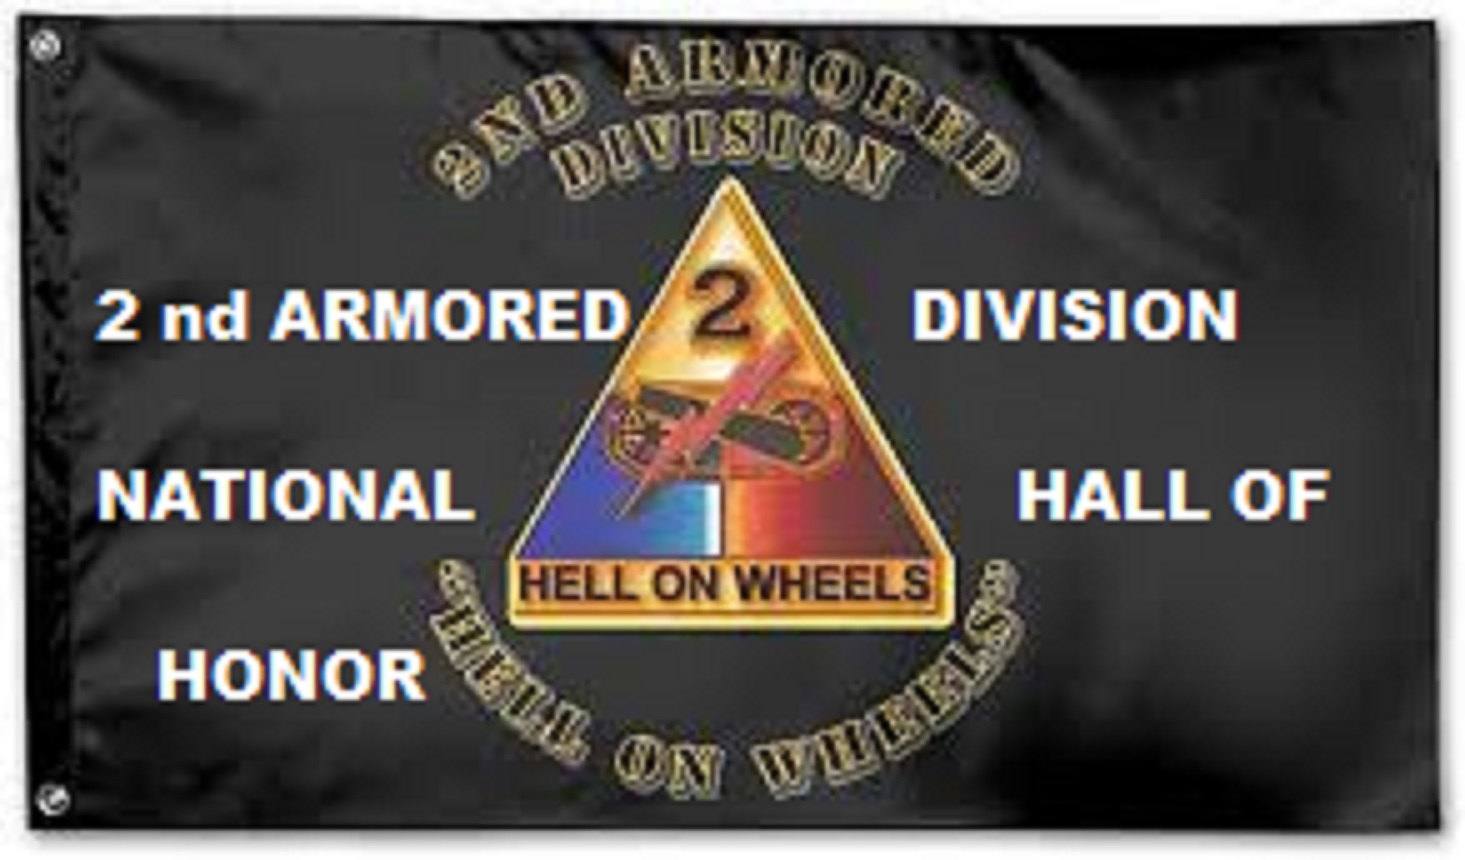 2nd ARMORED DIVISION NATIONAL HALL OF HONOR